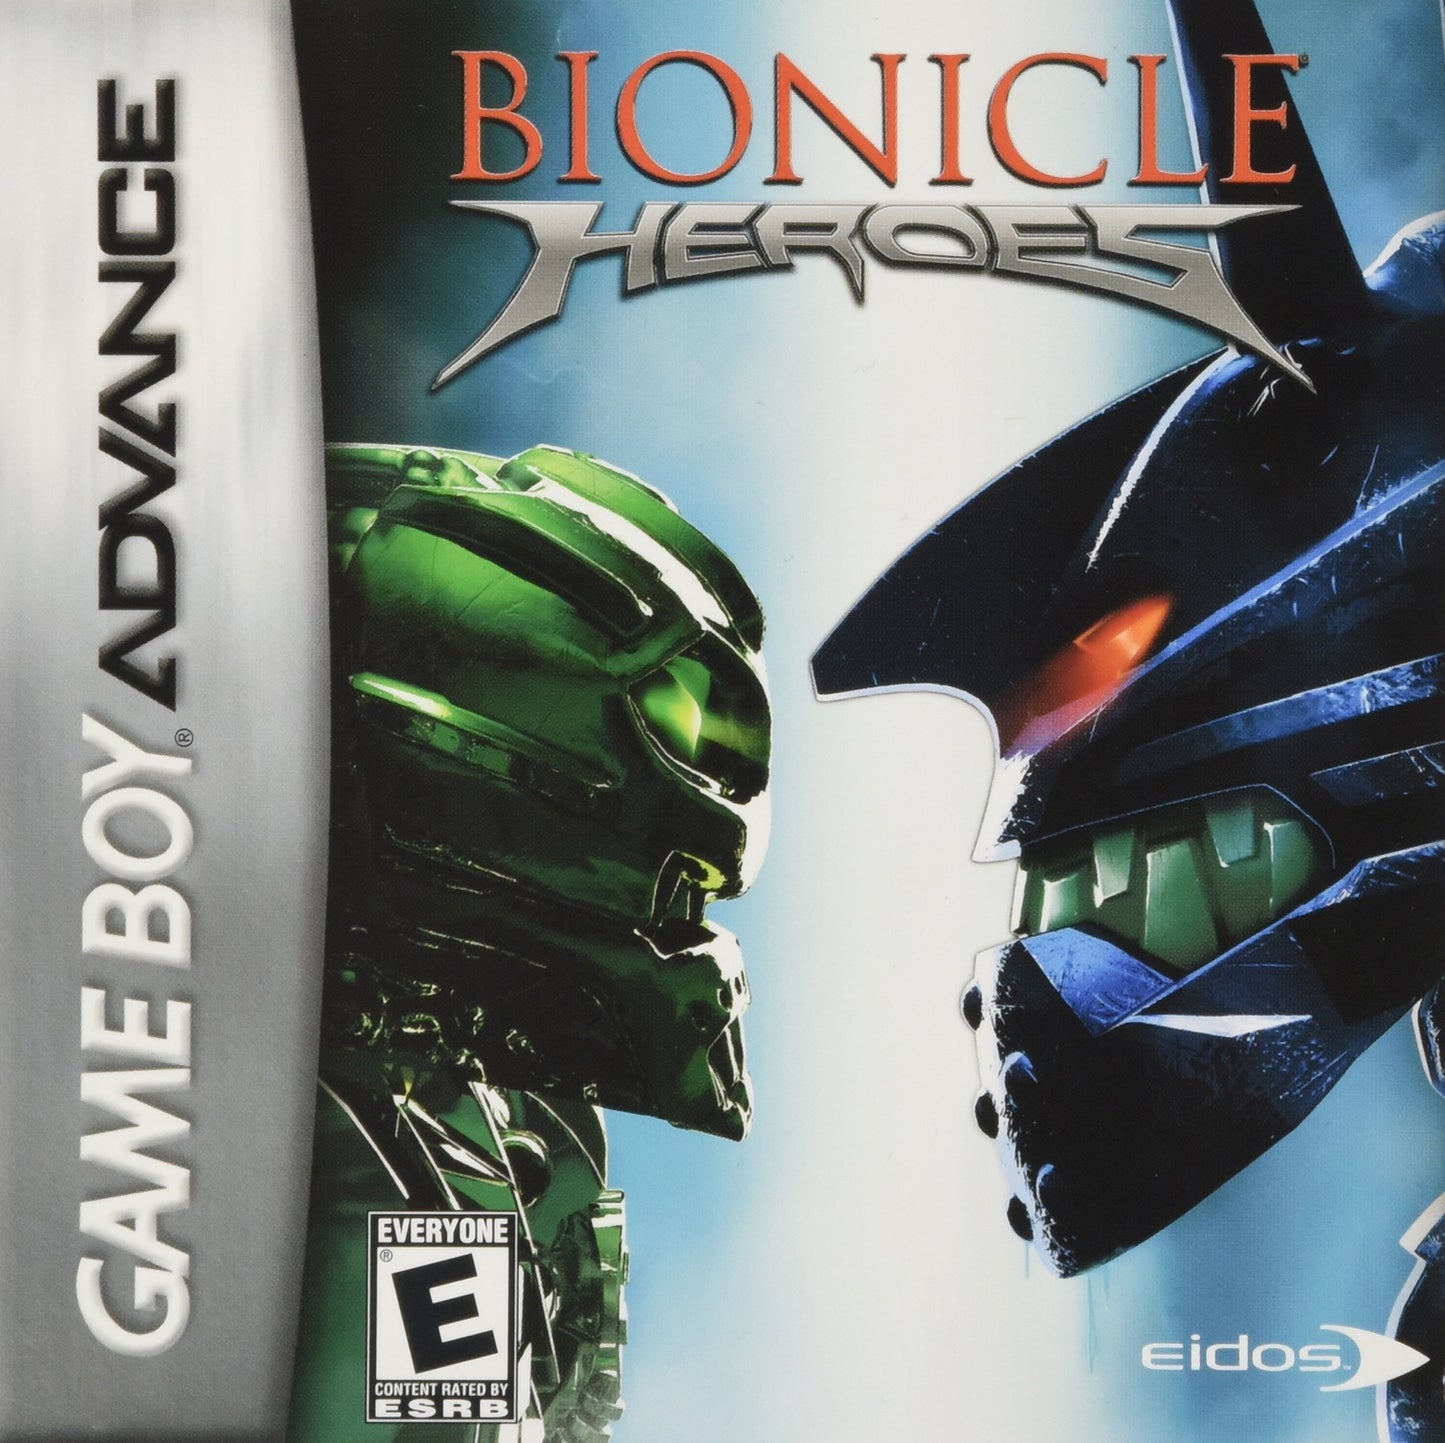 Bionicle Heroes (Gameboy Advance)